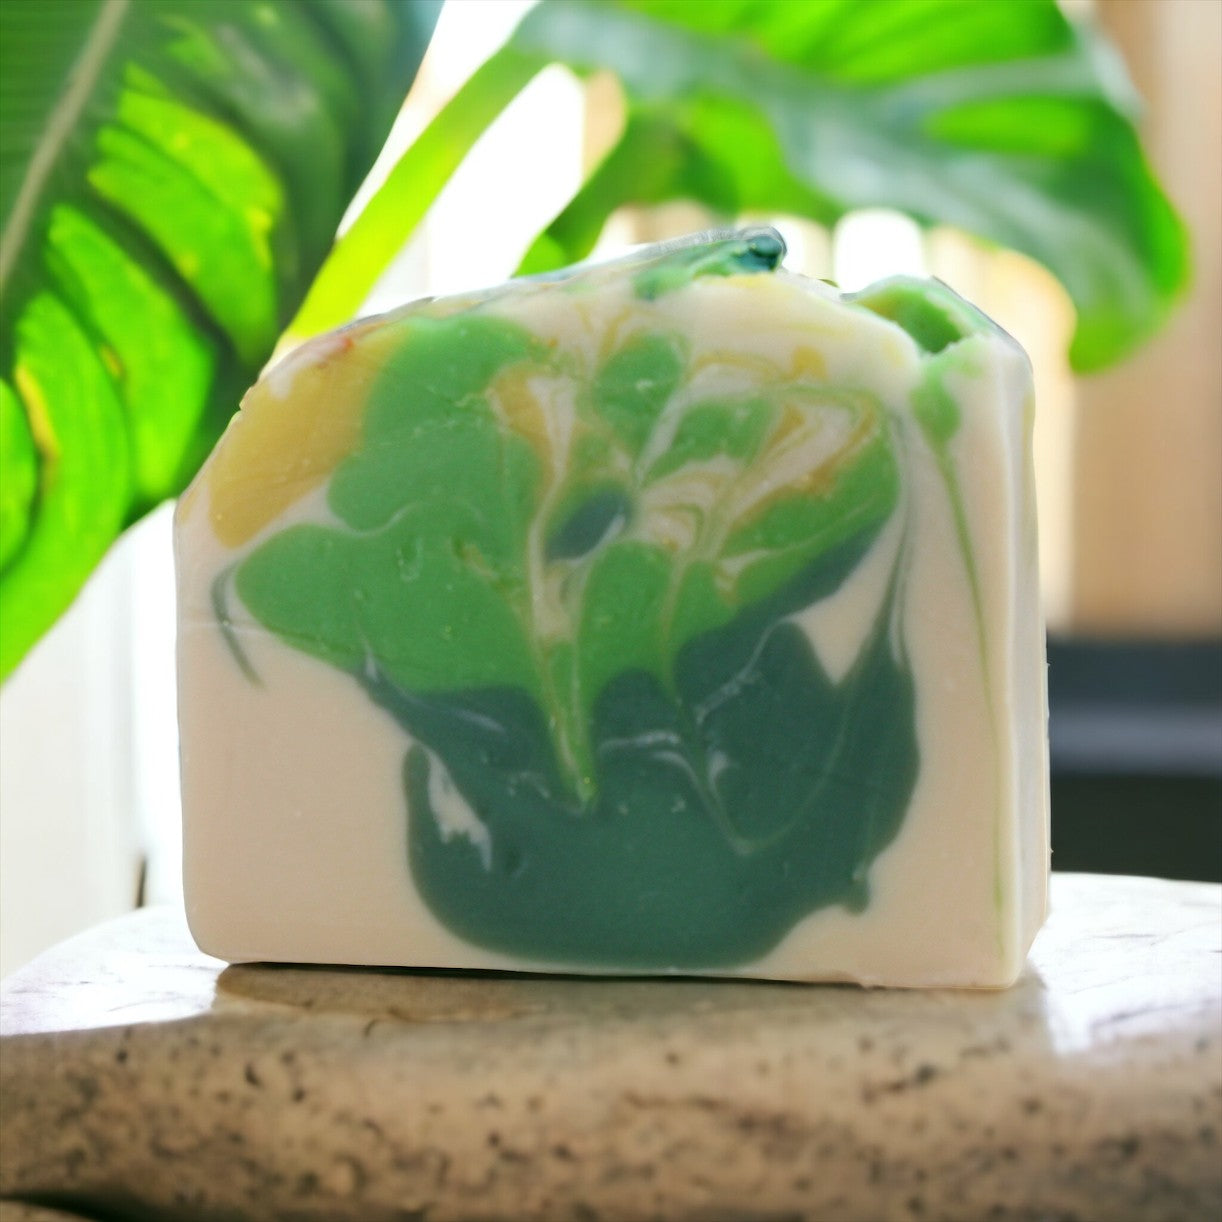 a close up of a soap on a table